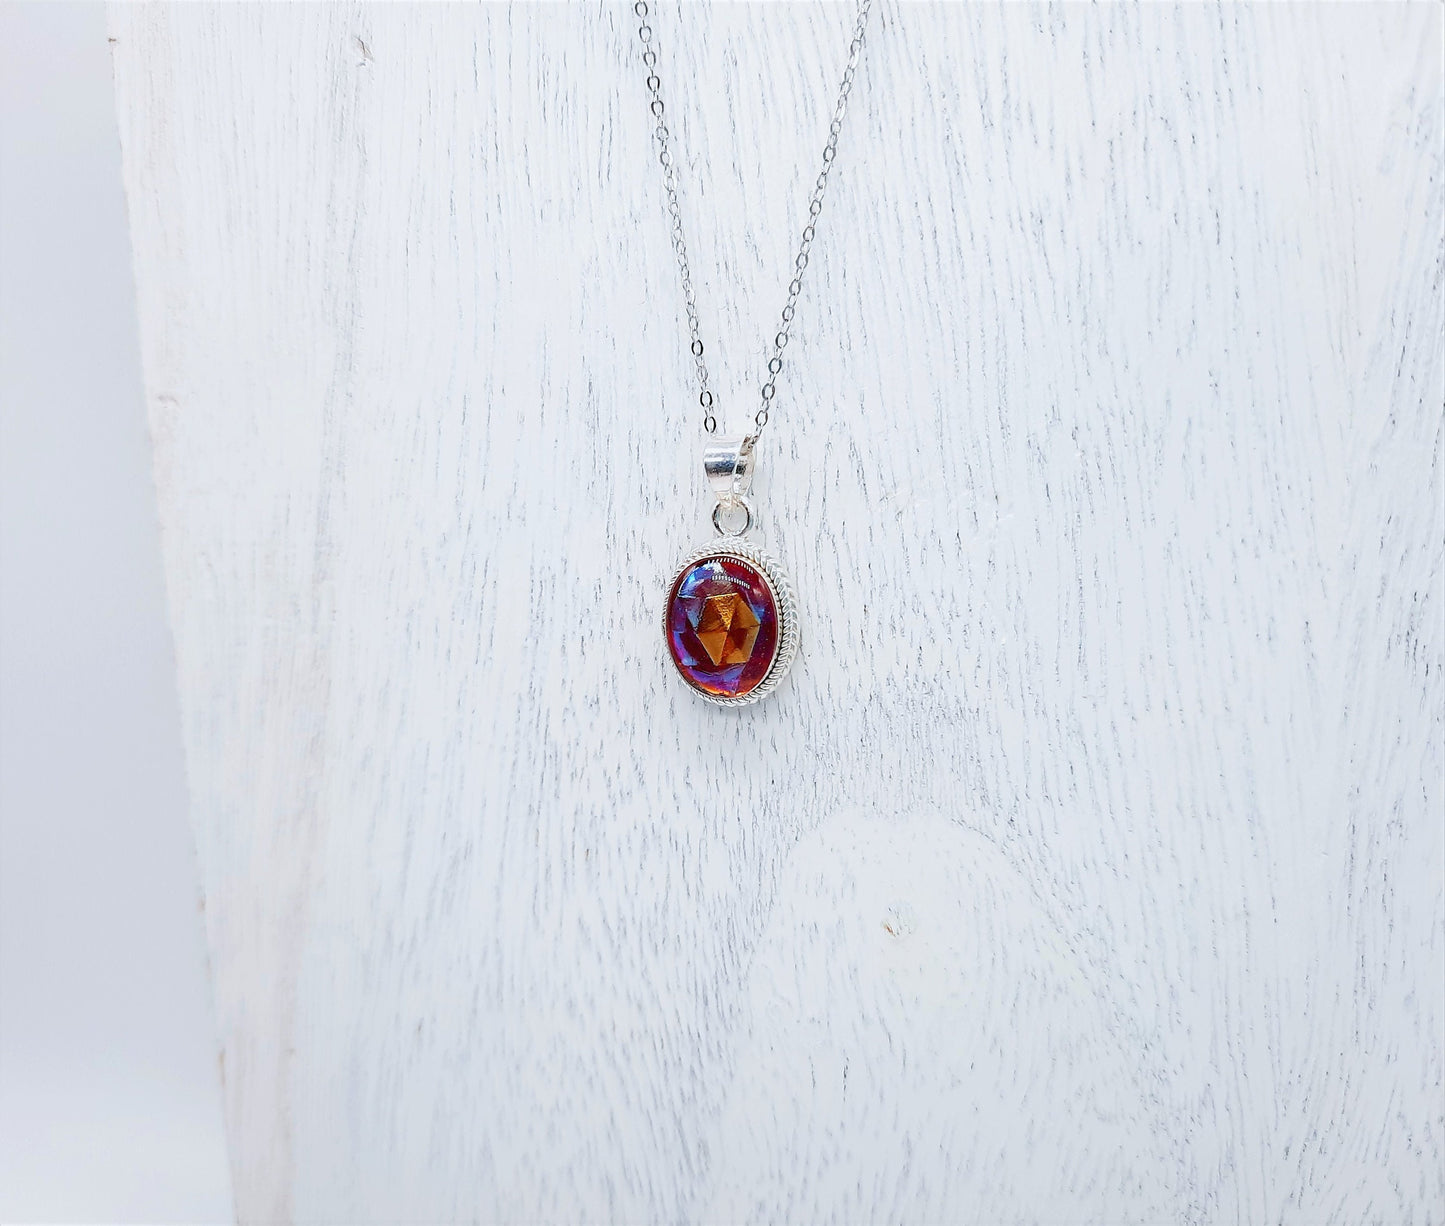 Handcrafted Multifaceted Vintage Ruby Red Aurora Borealis Glass Cabochon Pendant Necklace, Domed w/ Mica Infused Resin, 925 Sterling Silver